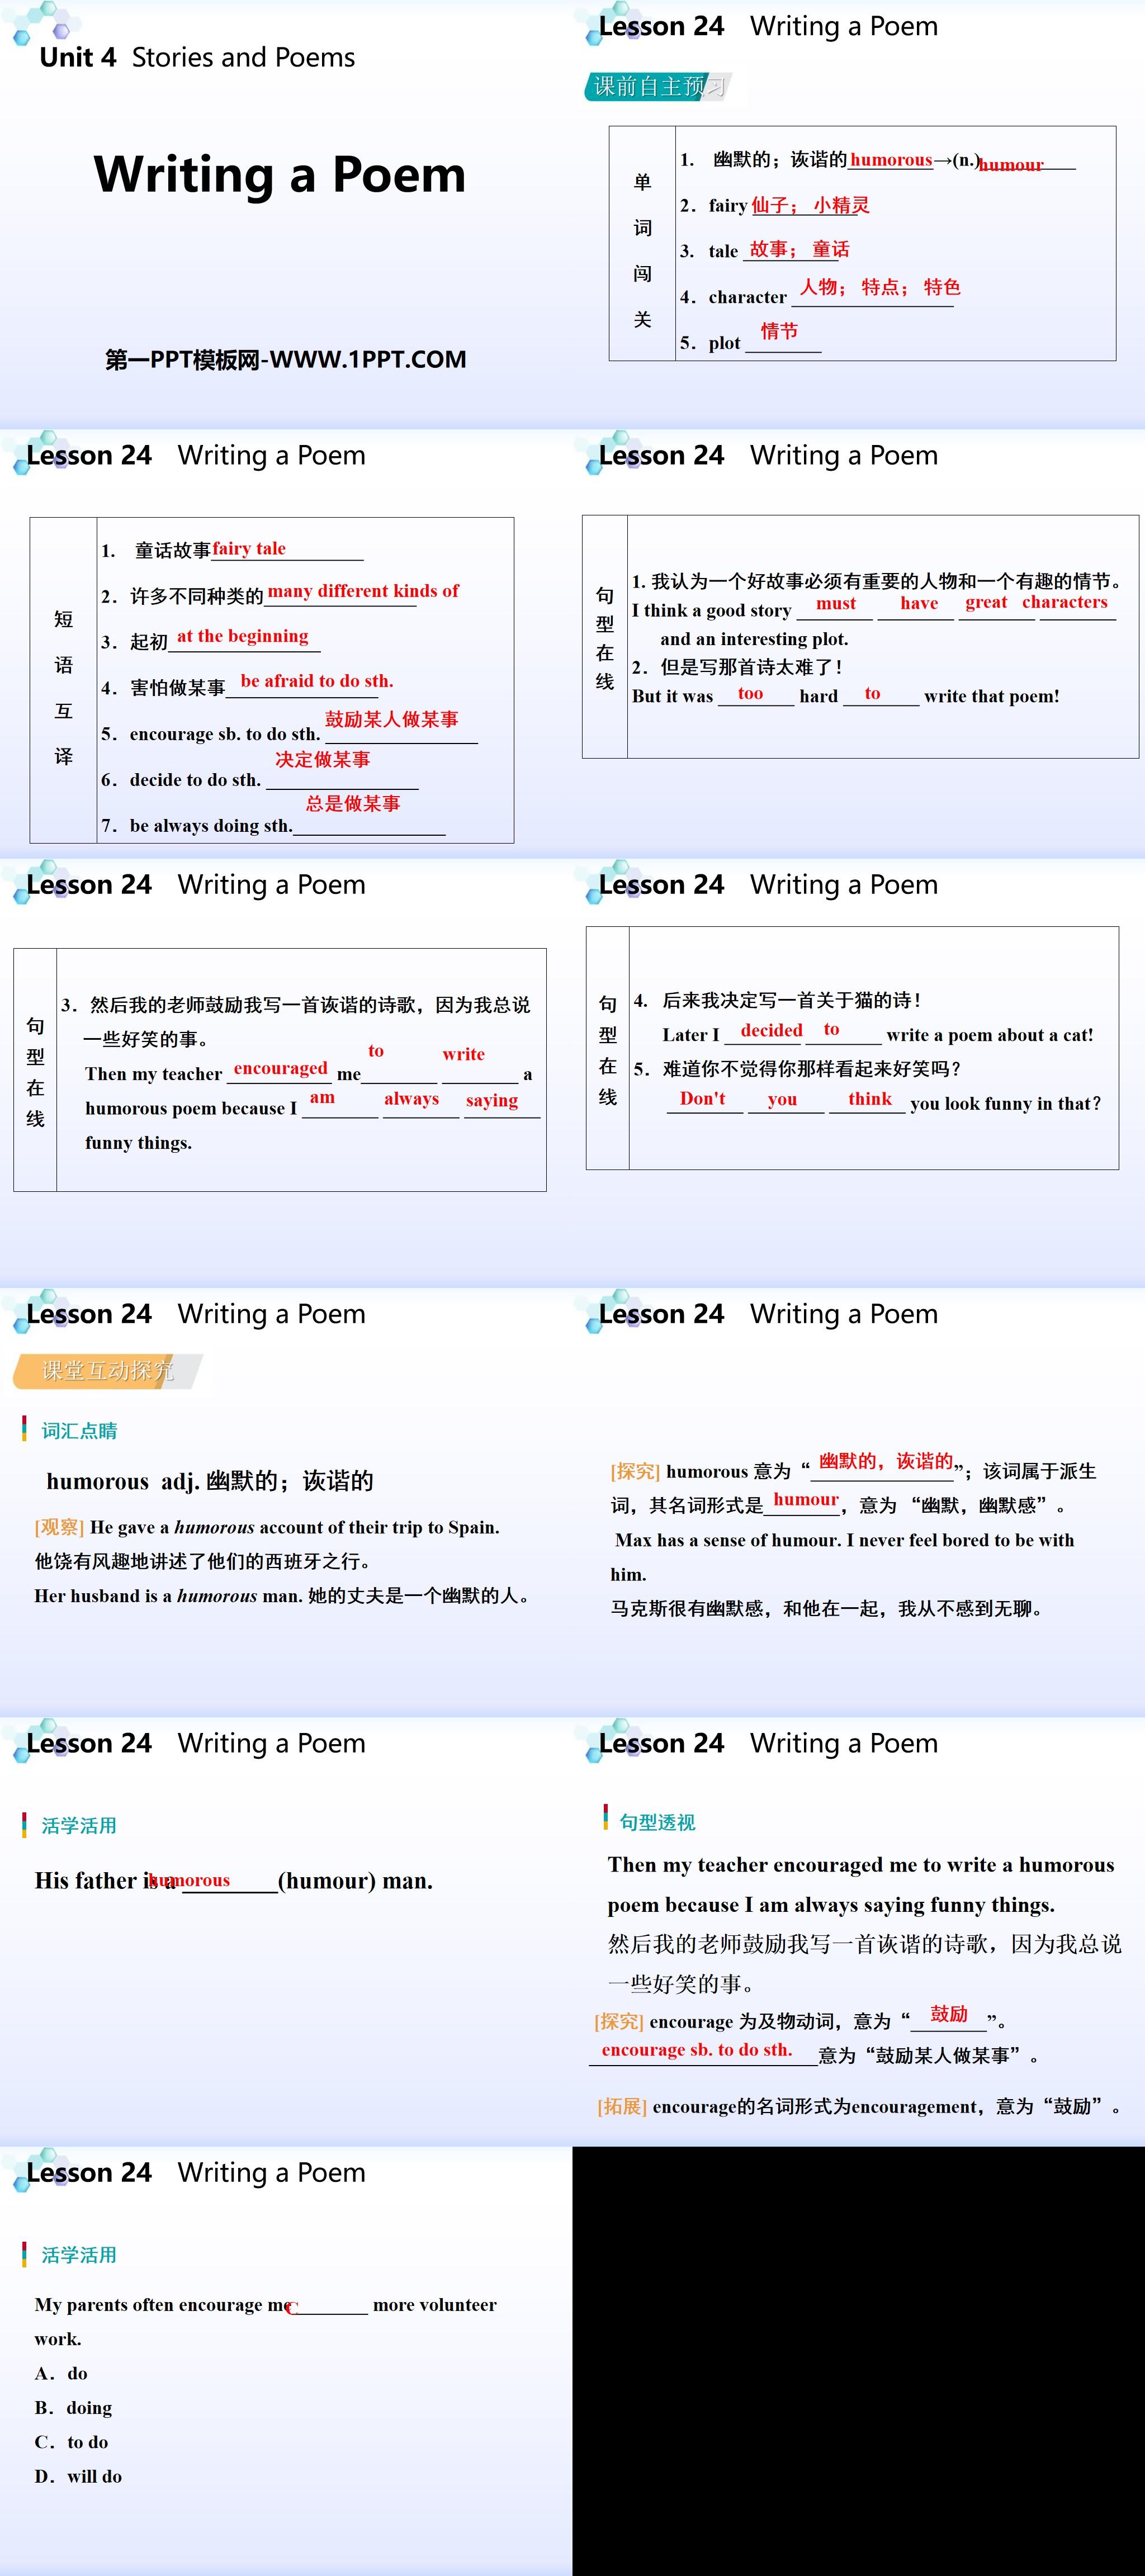 《Writing a Poem》Stories and Poems PPT教学课件
（2）